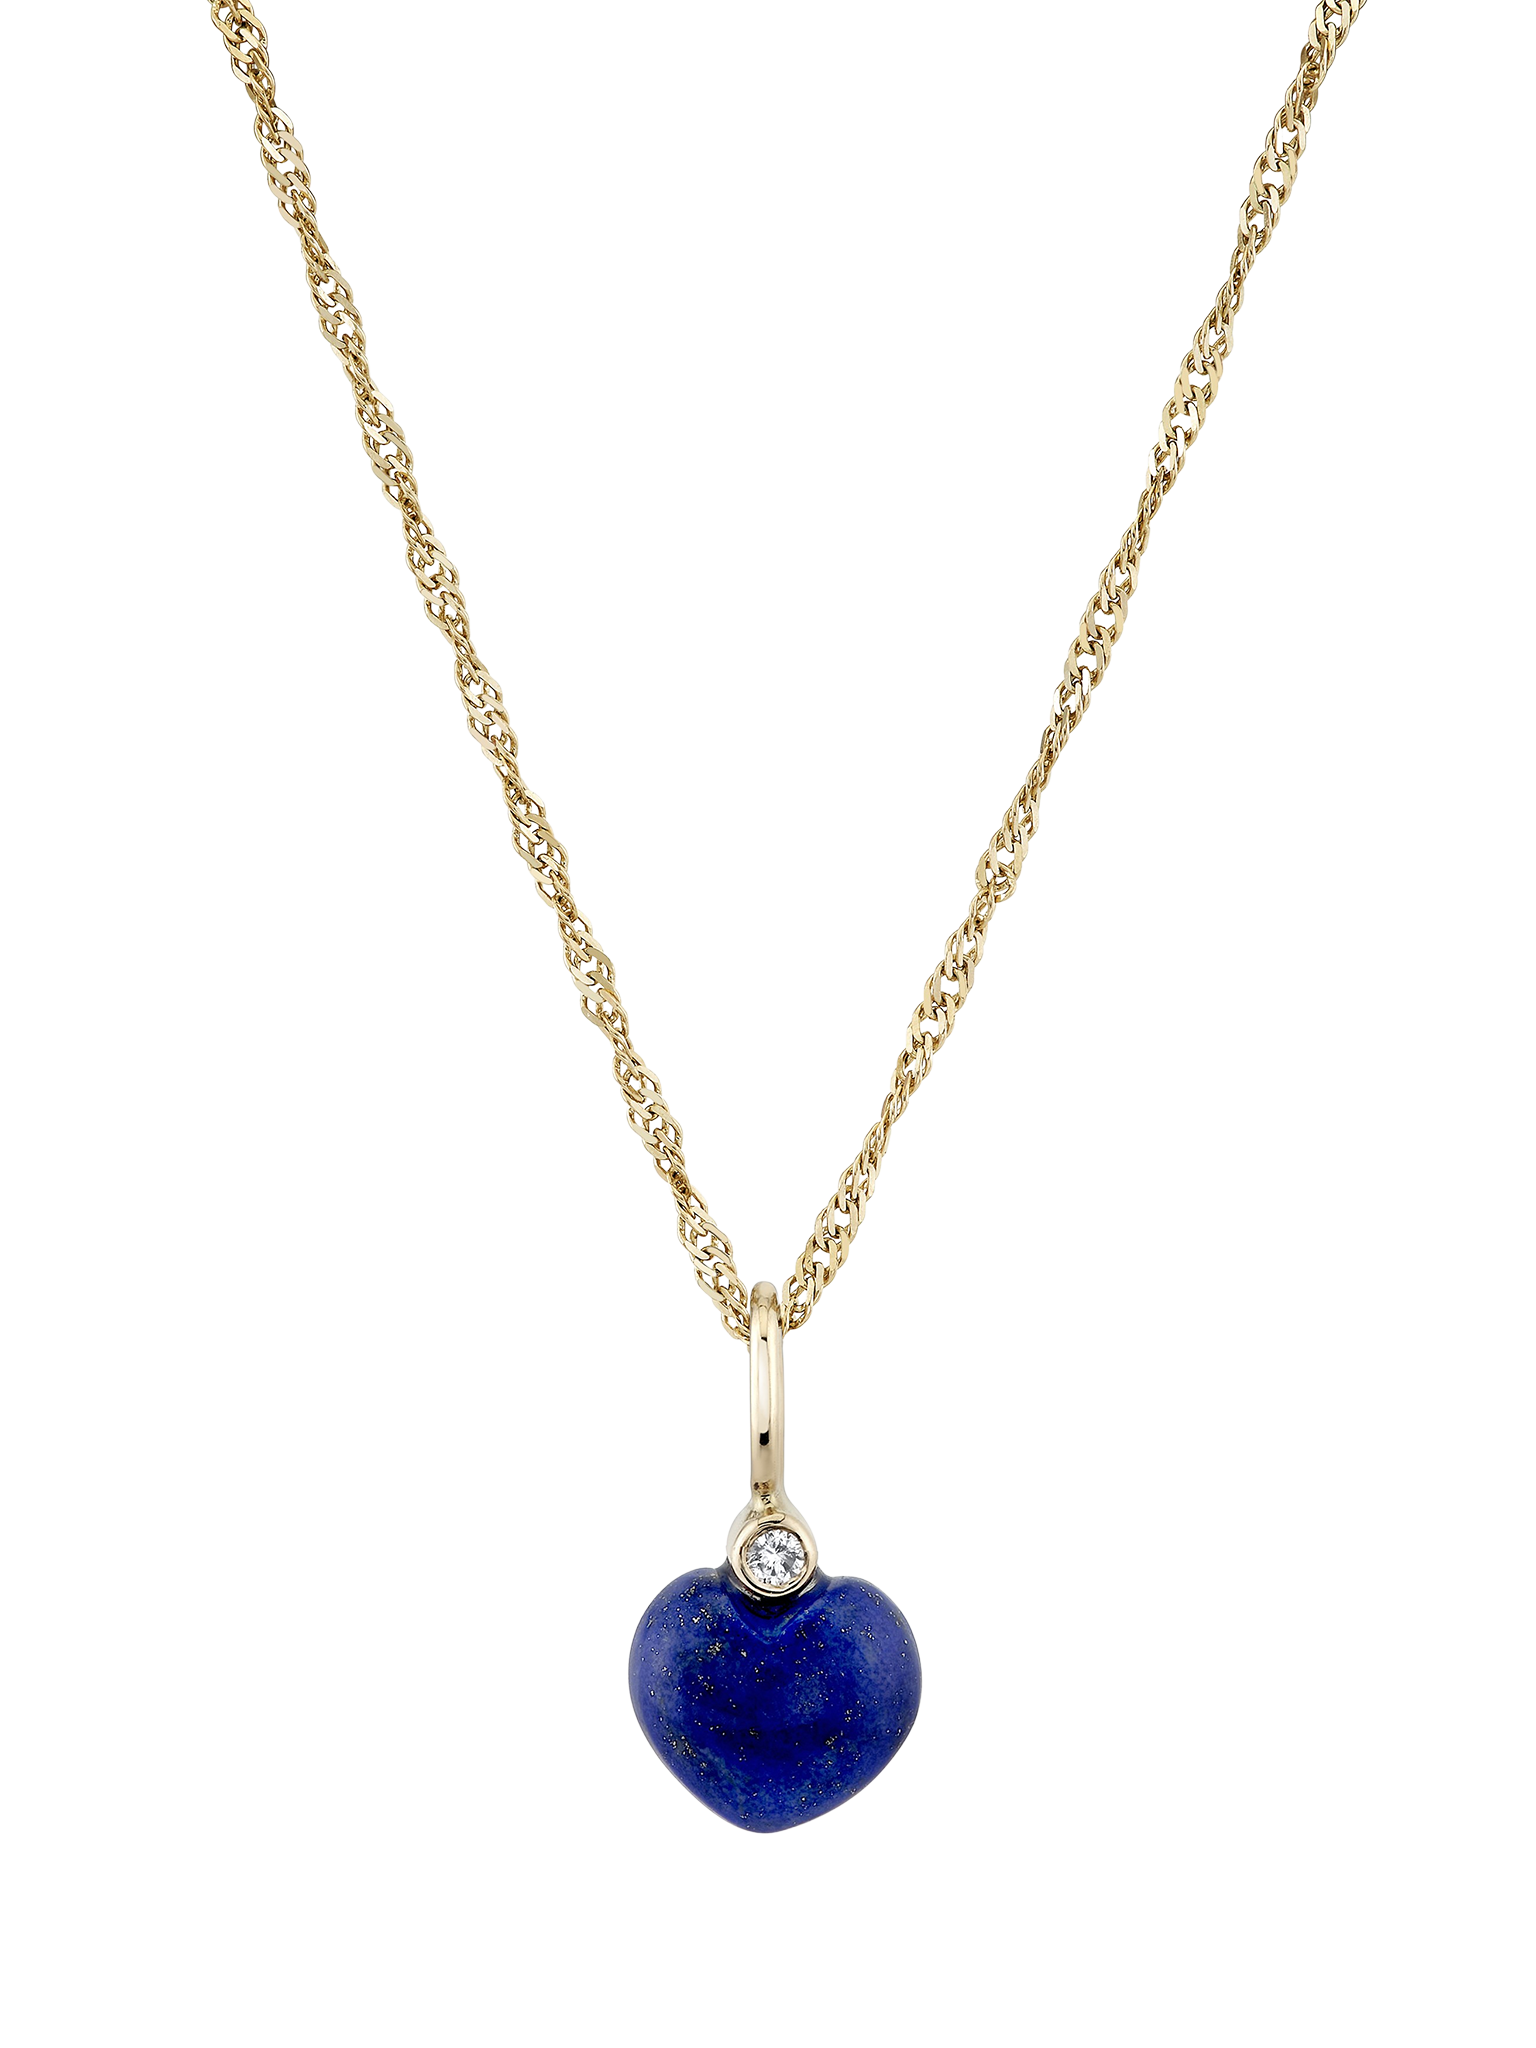 Carved Lapis Sweetheart Charm with 18" chain